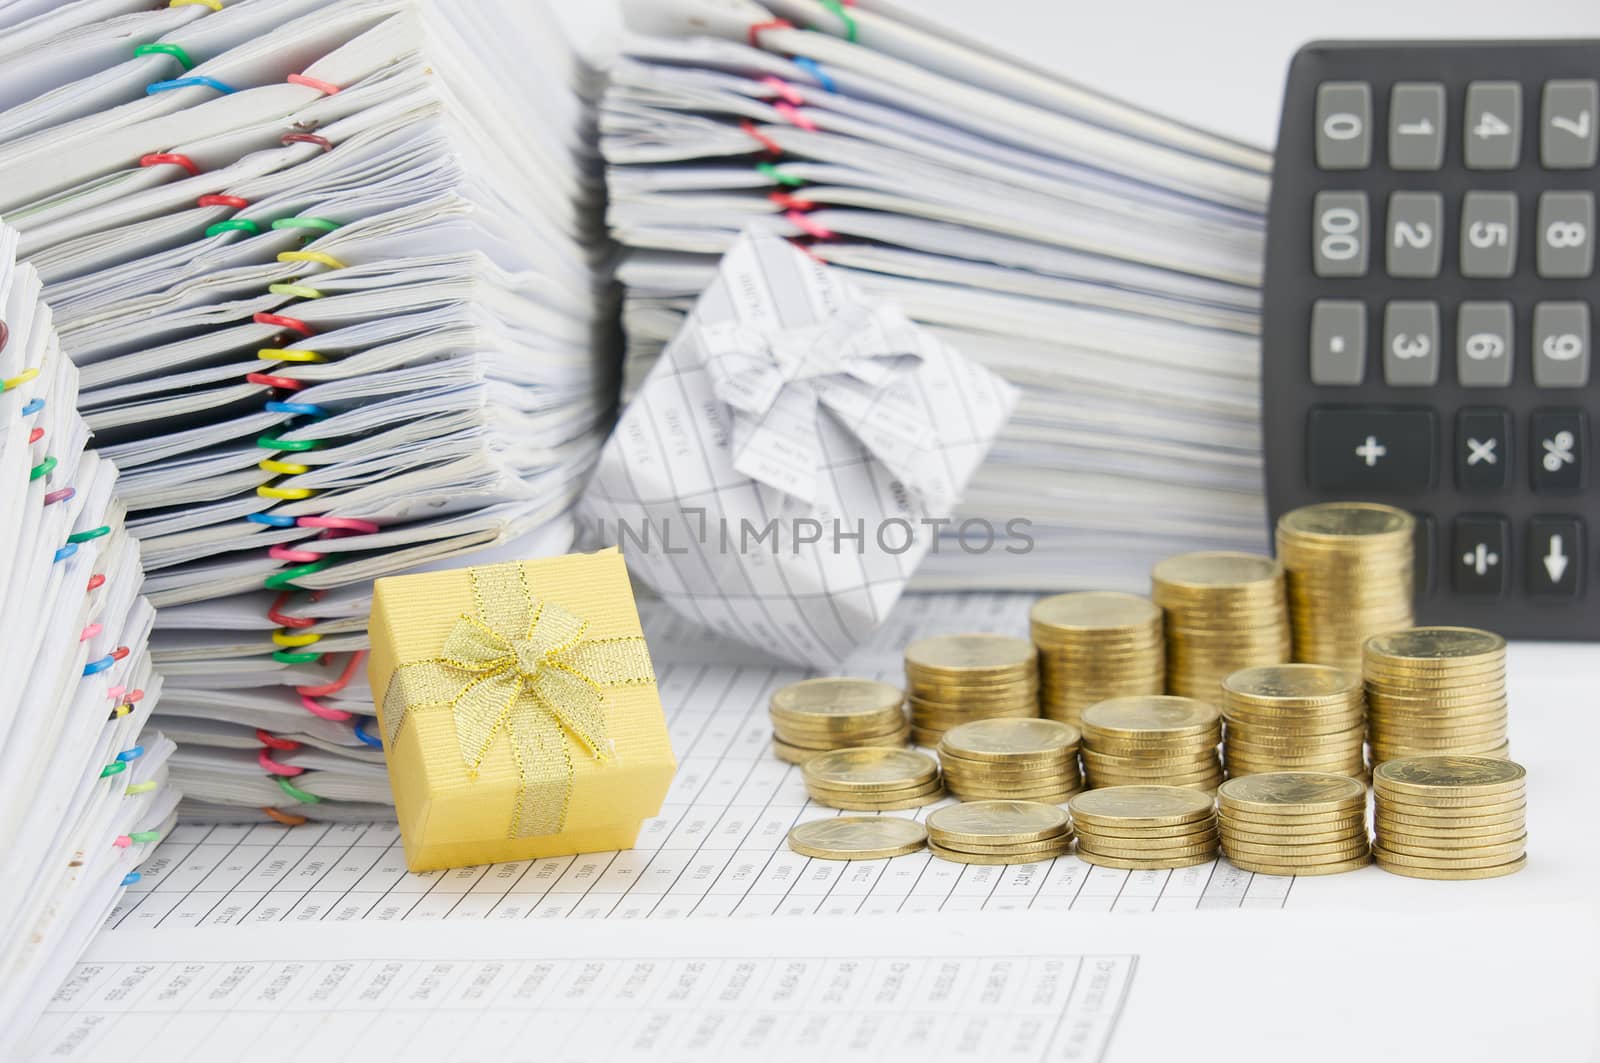 Gold gift box and step pile of gold coins on finance account have blur calculator and pile of paperwork as background.